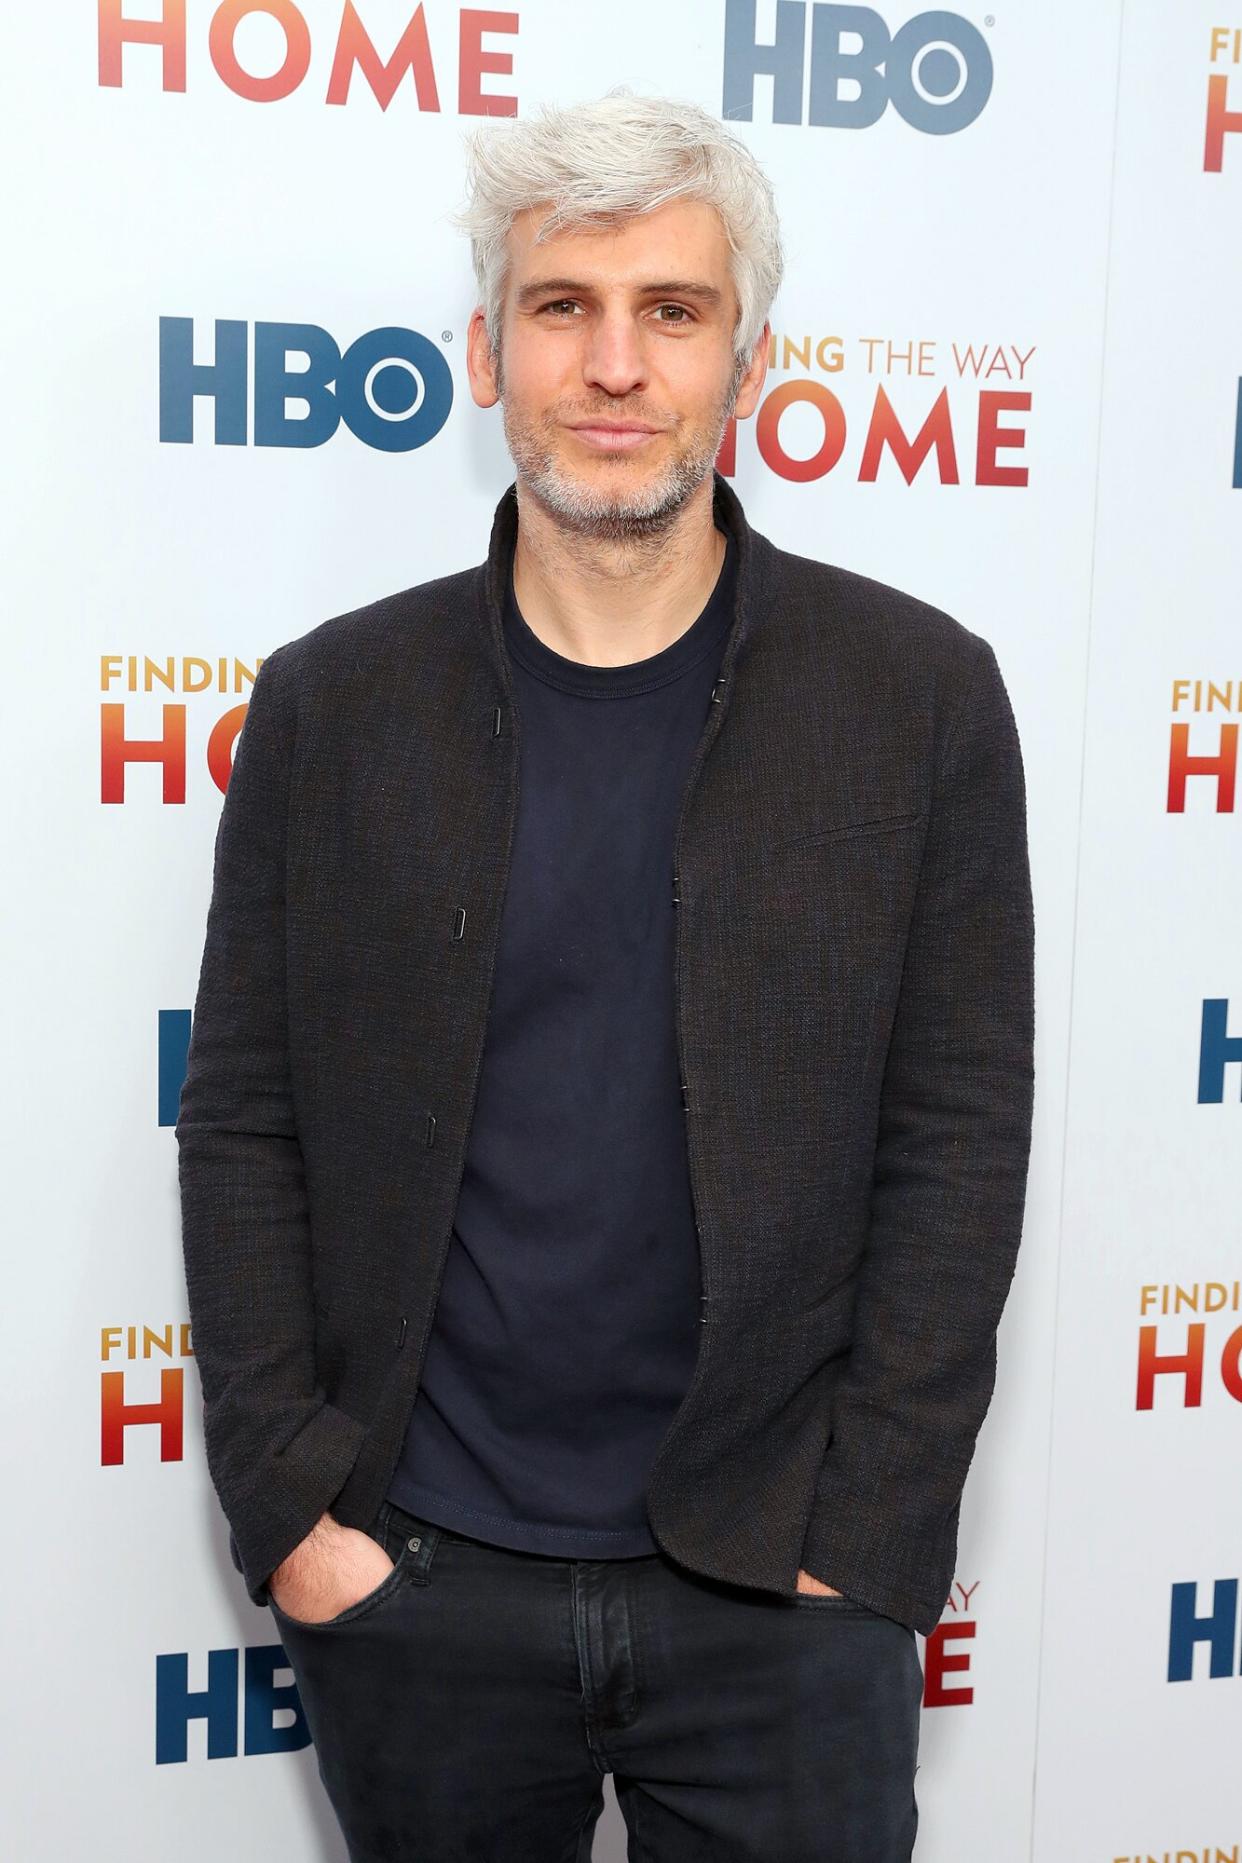 Max Joseph attends HBO's "Finding The Way Home" World Premiere at Hudson Yards on December 11, 2019 in New York City.